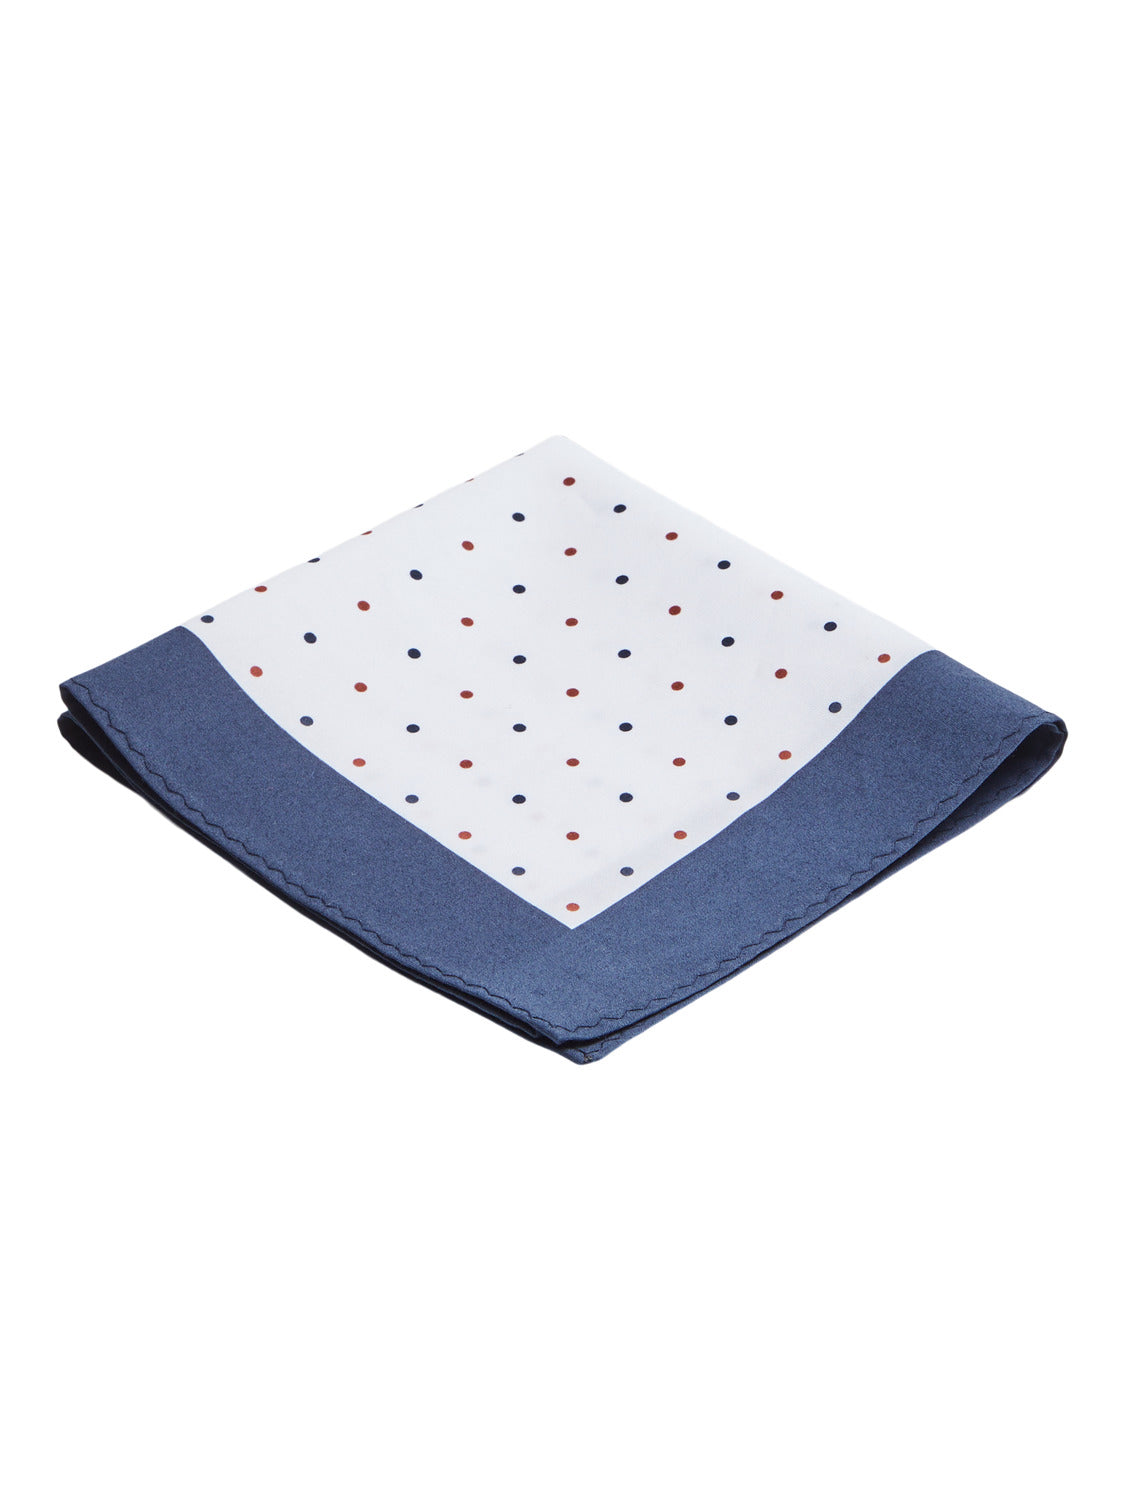 SELECTED HOMME - MARVIN Handkerchief - White